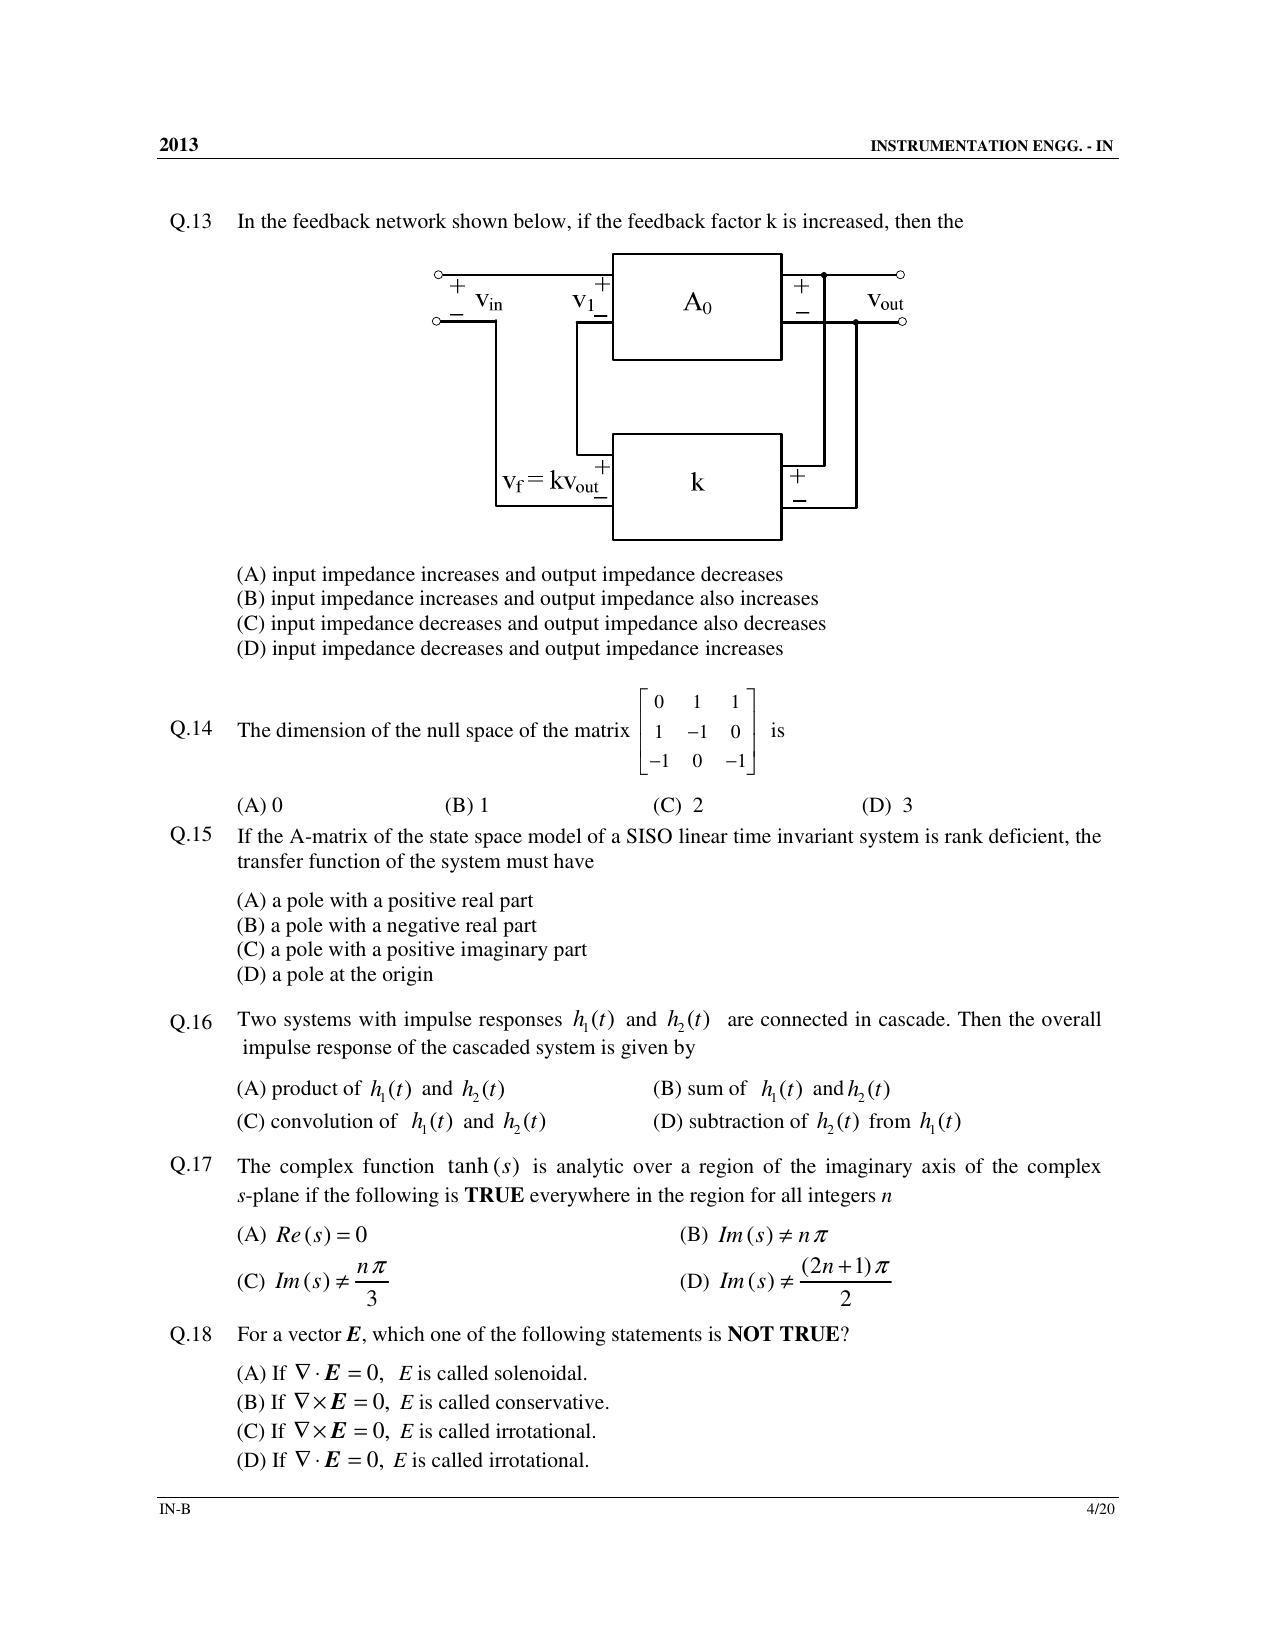 GATE 2013 Instrumentation Engineering (IN) Question Paper with Answer Key - Page 22